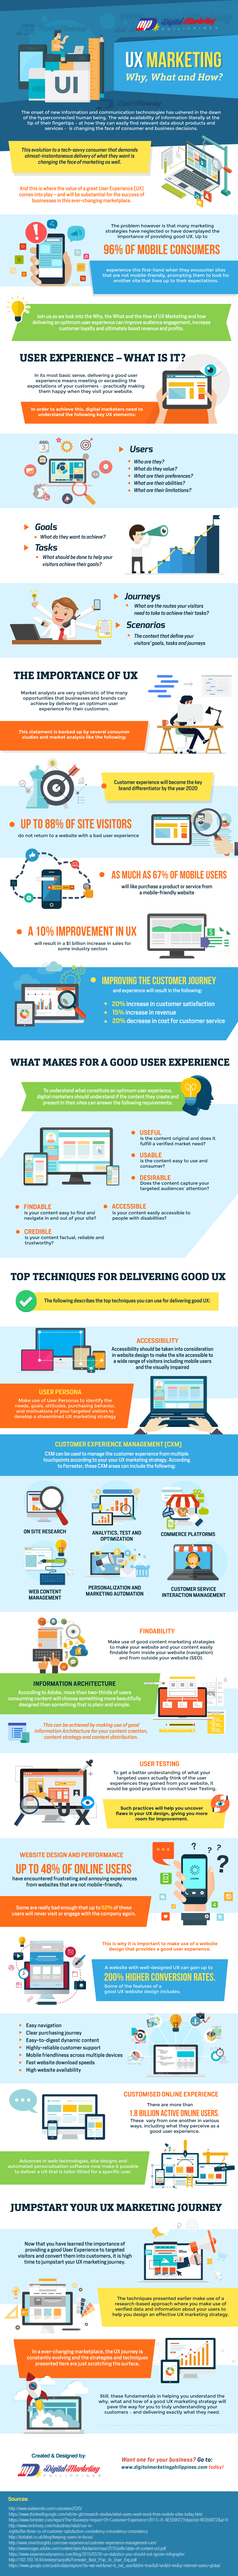 How to Improve Your User experience for Your visitors